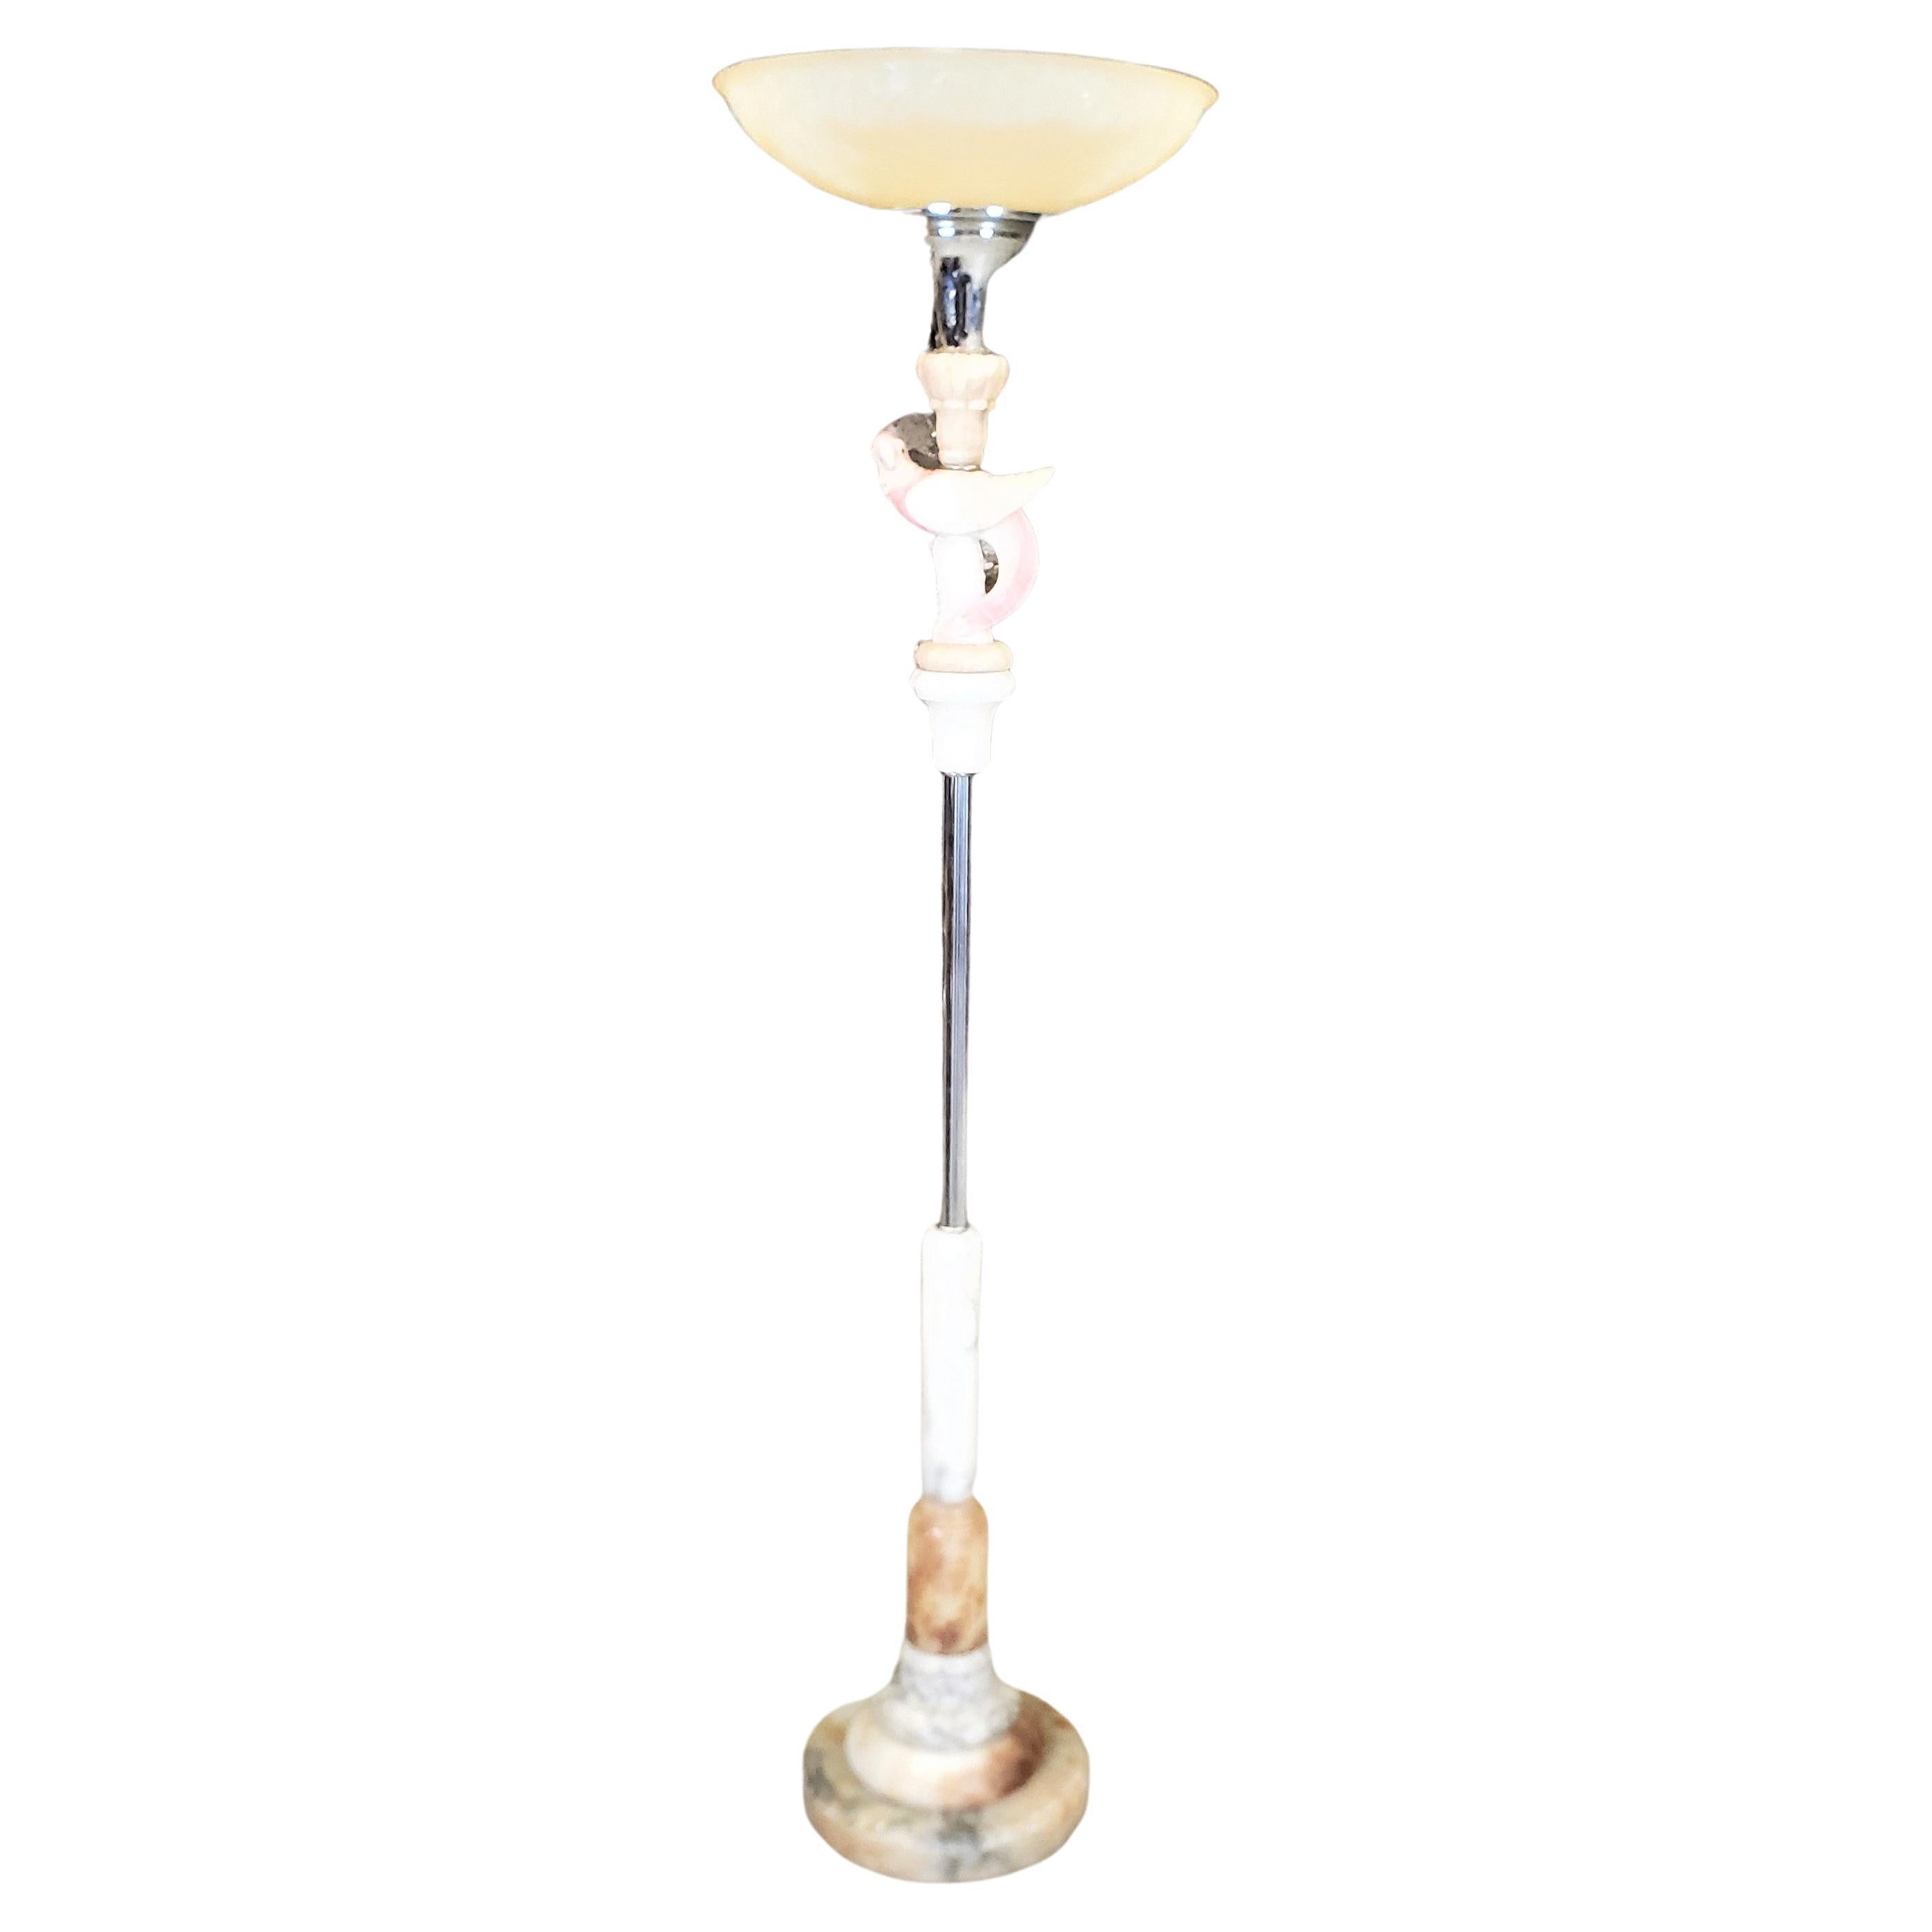 Art Deco Chrome Torchiere Floor Lamp with a Carved Parrot & Stacked Marble Base For Sale